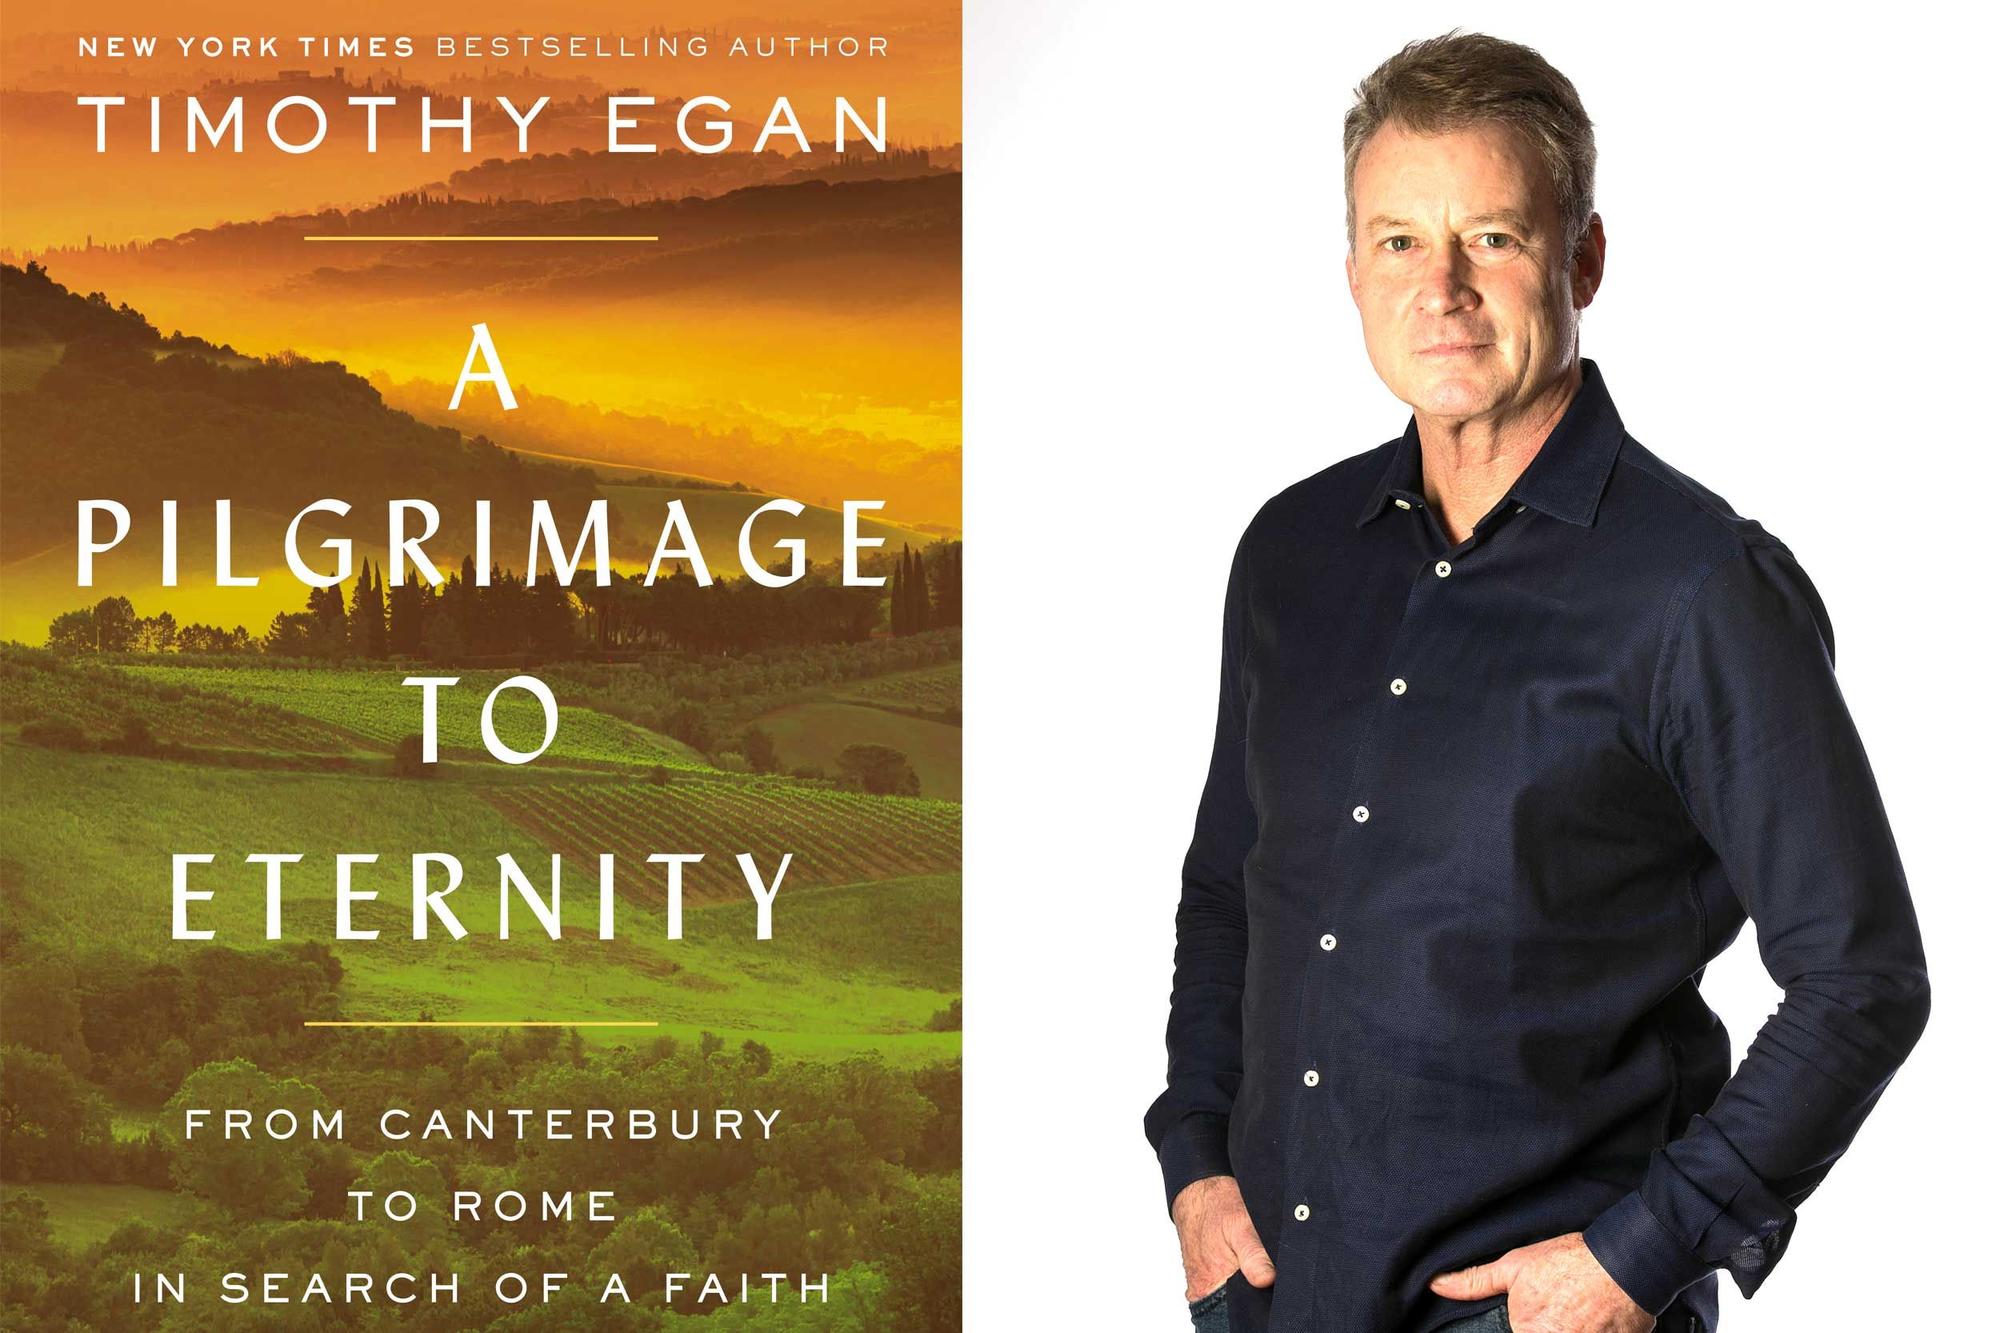 Seattle author Timothy Egan walks an ancient route to find faith